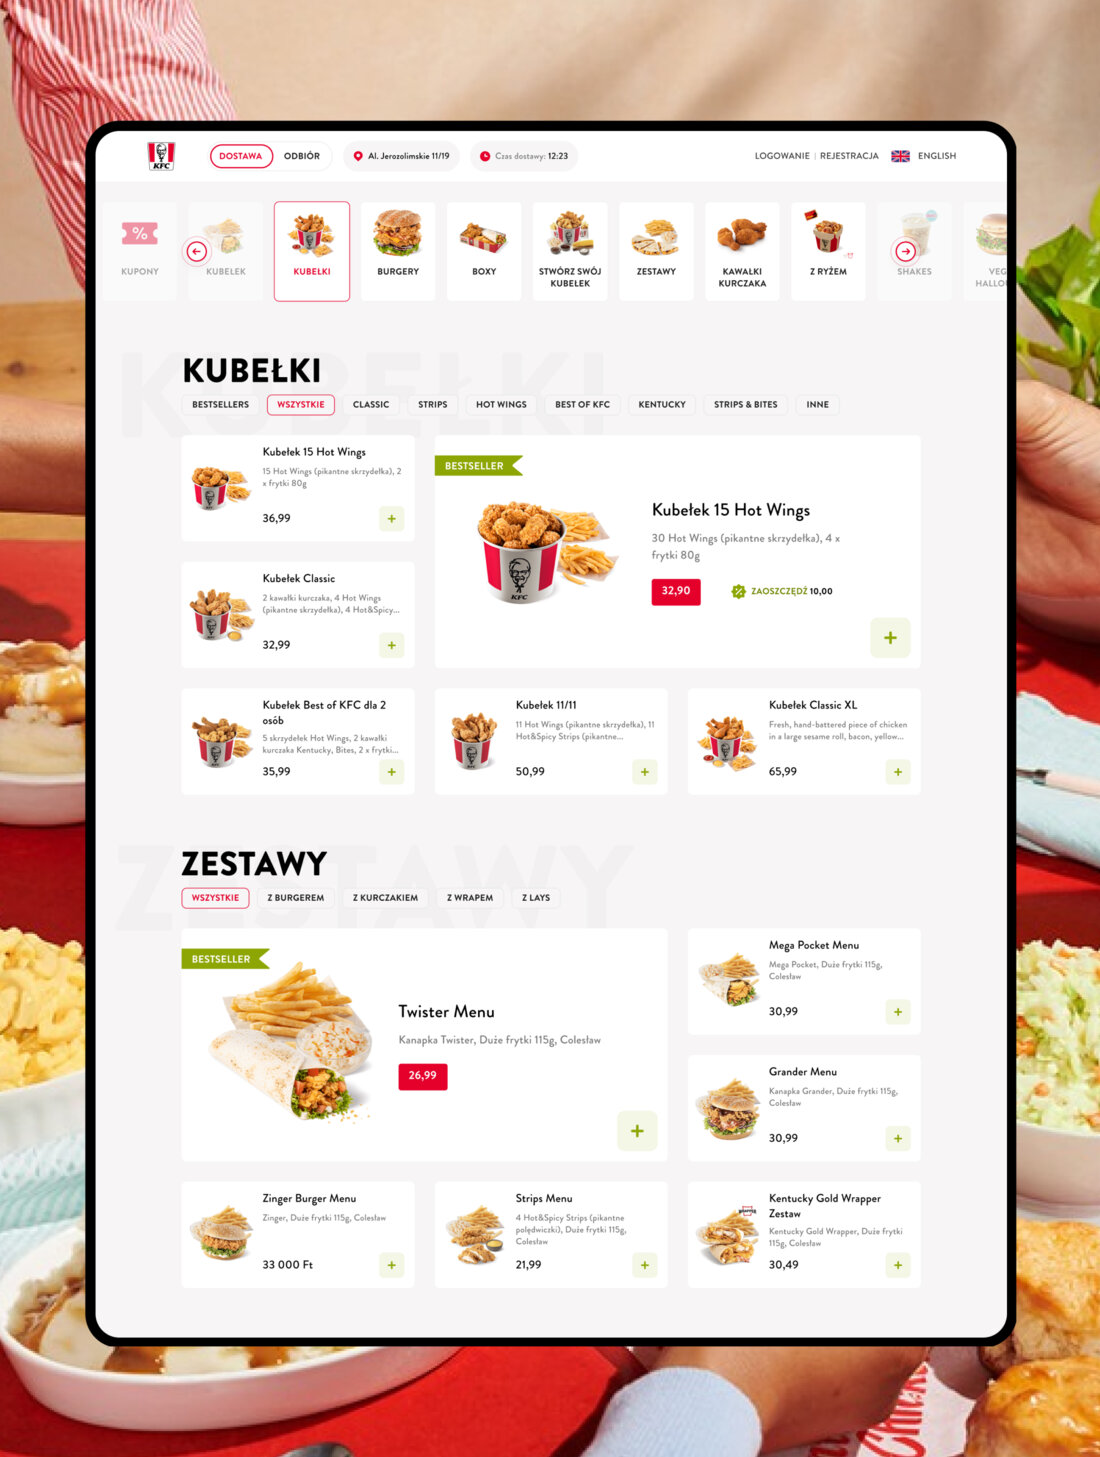 Product page from KFC's website.